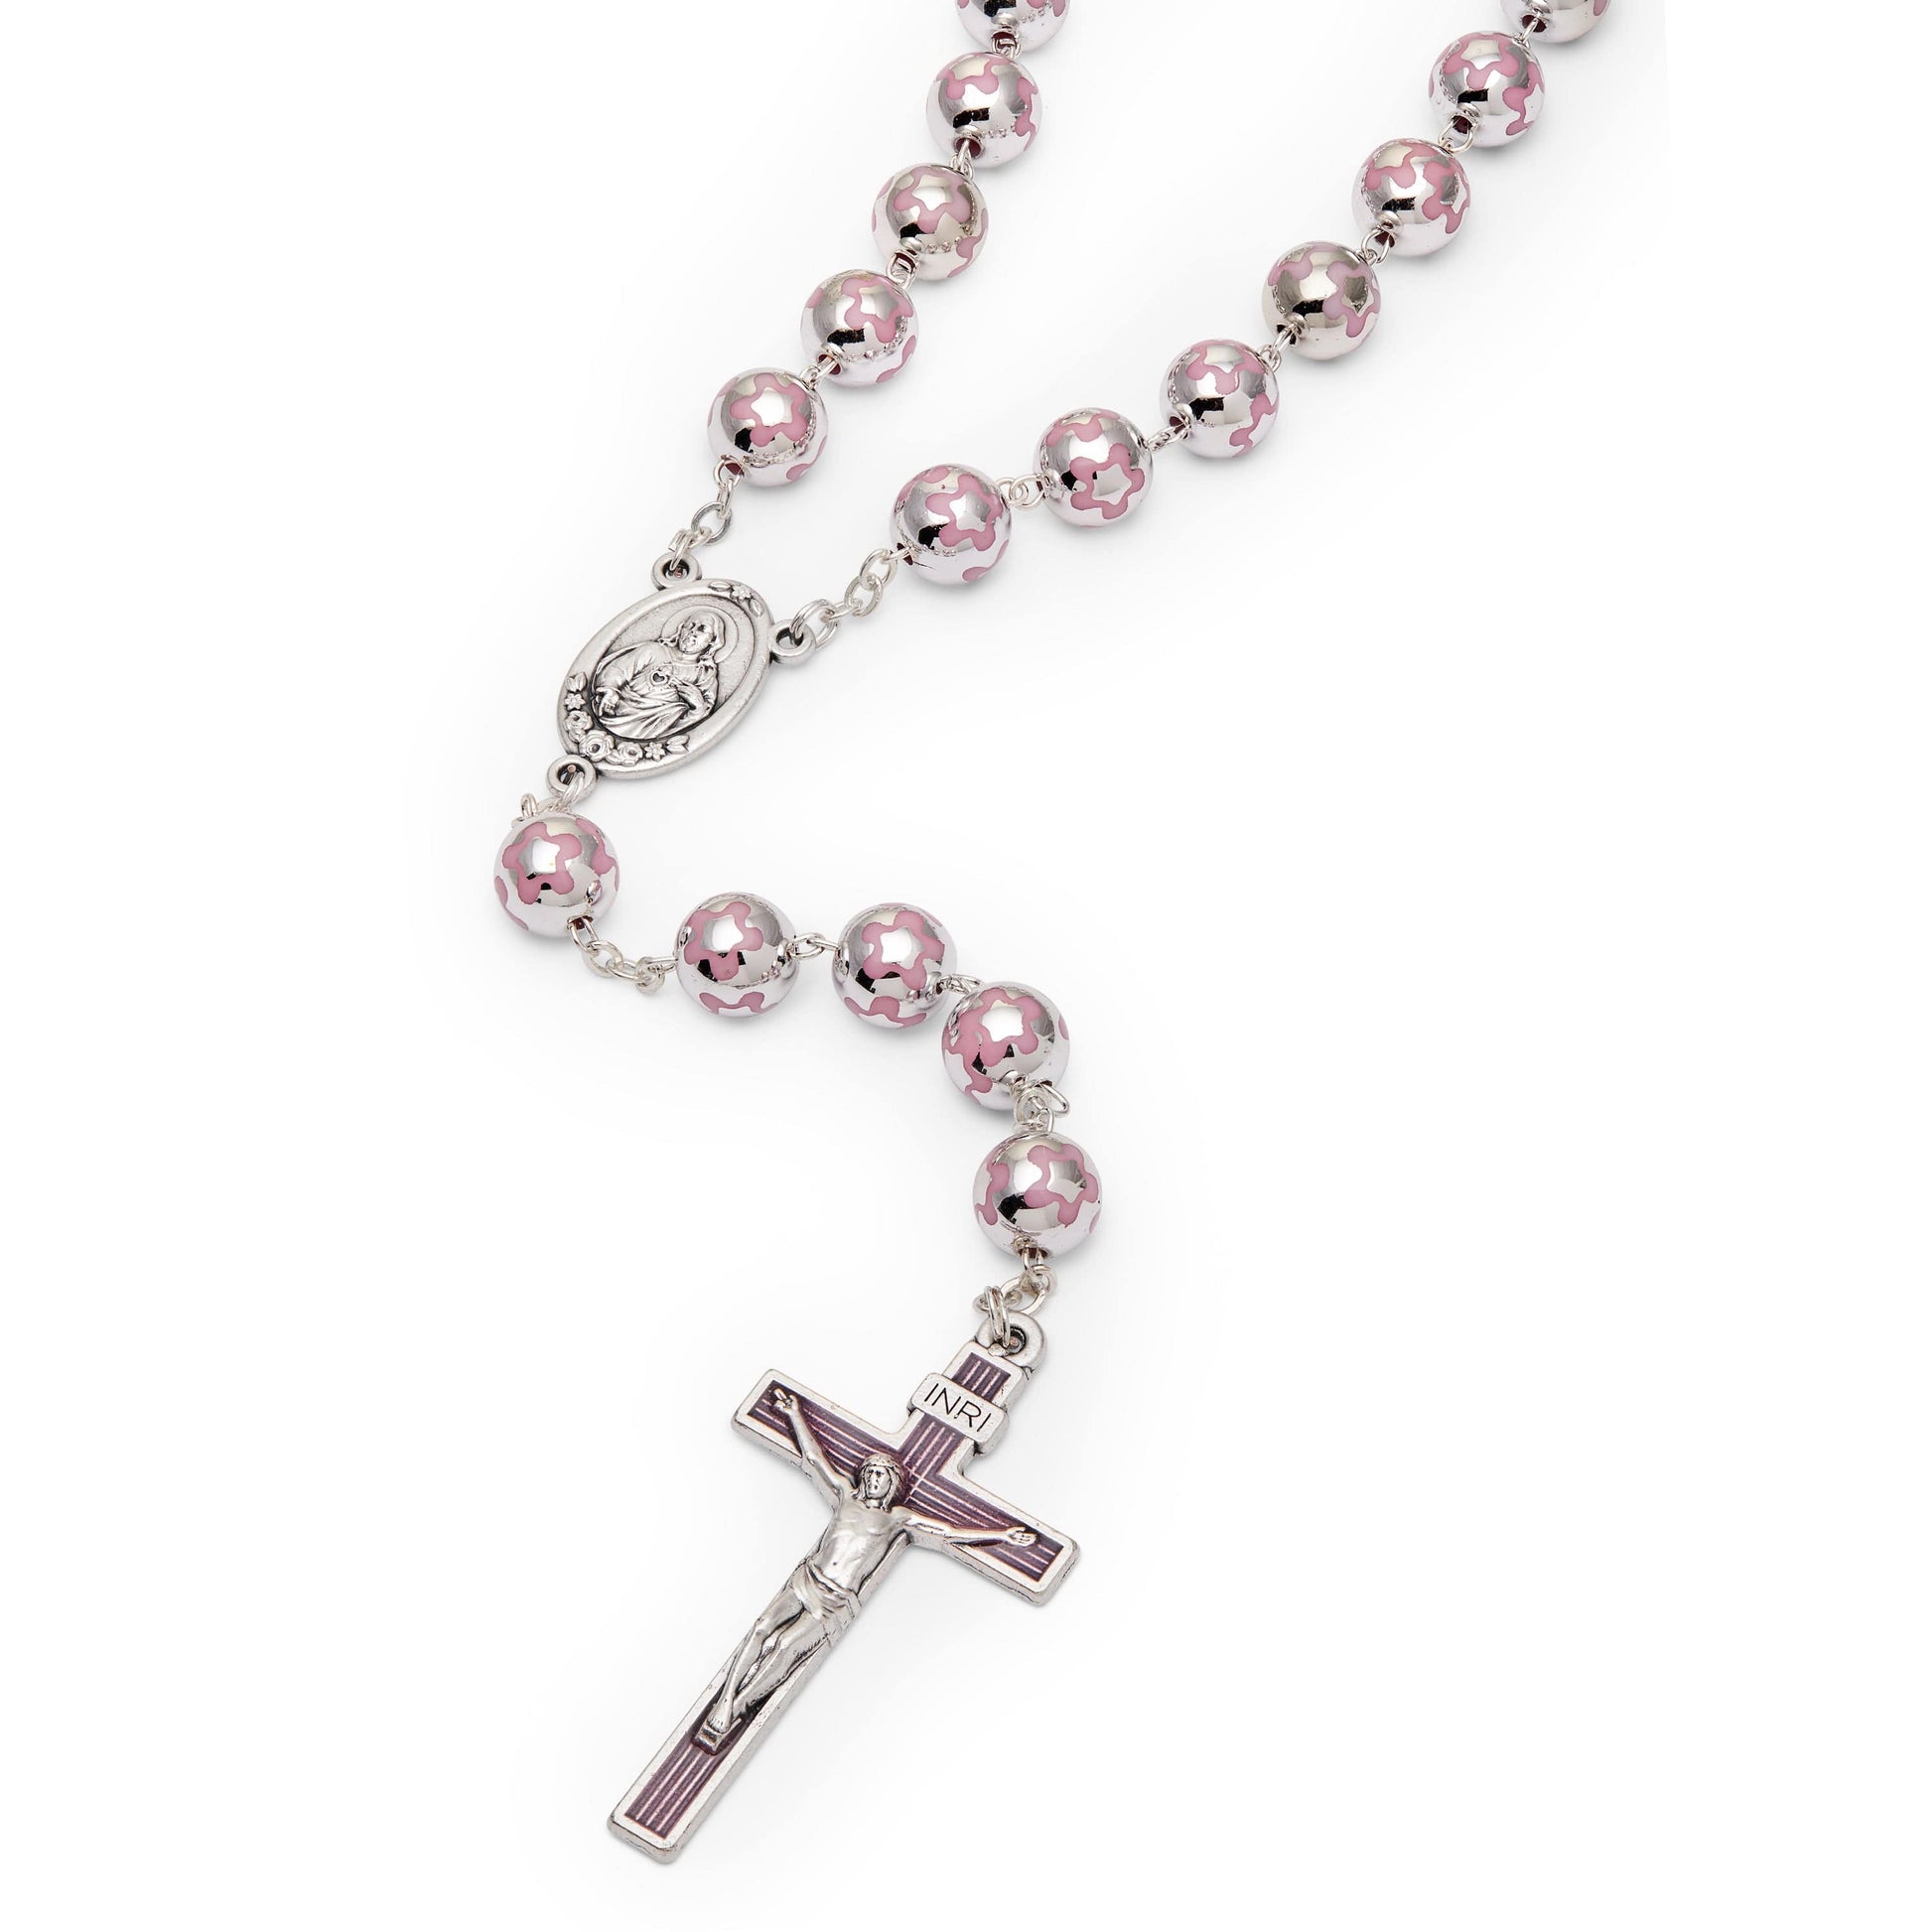 MONDO CATTOLICO Prayer Beads 58 cm (22.83 in) / 10 mm (0.39 in) Sacred Heart of Jesus Rosary in Silver Color Beads decorated with Pink Flowers